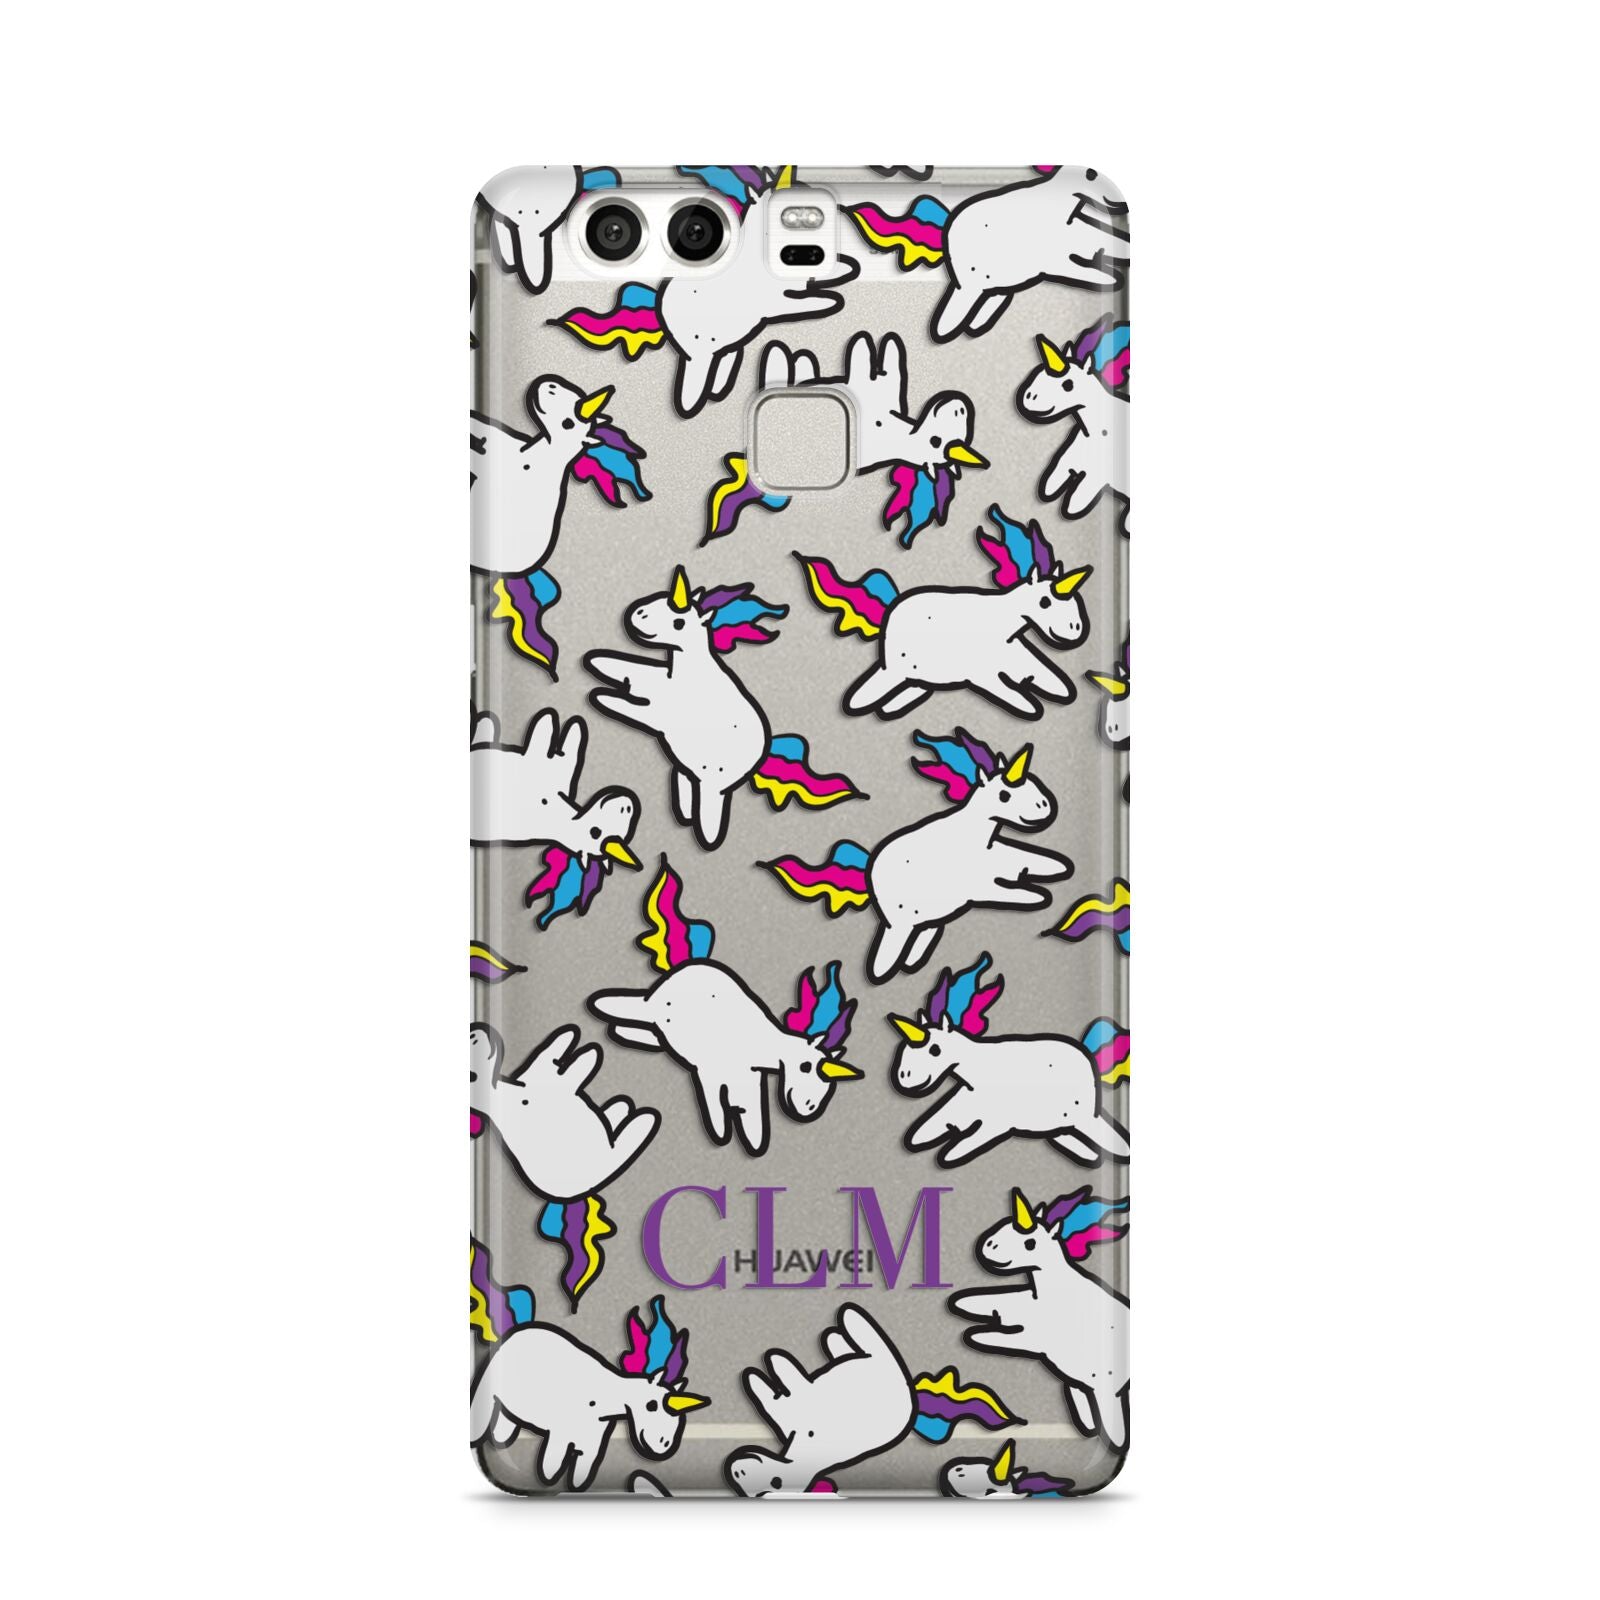 Personalised Unicorn With Initials Huawei P9 Case